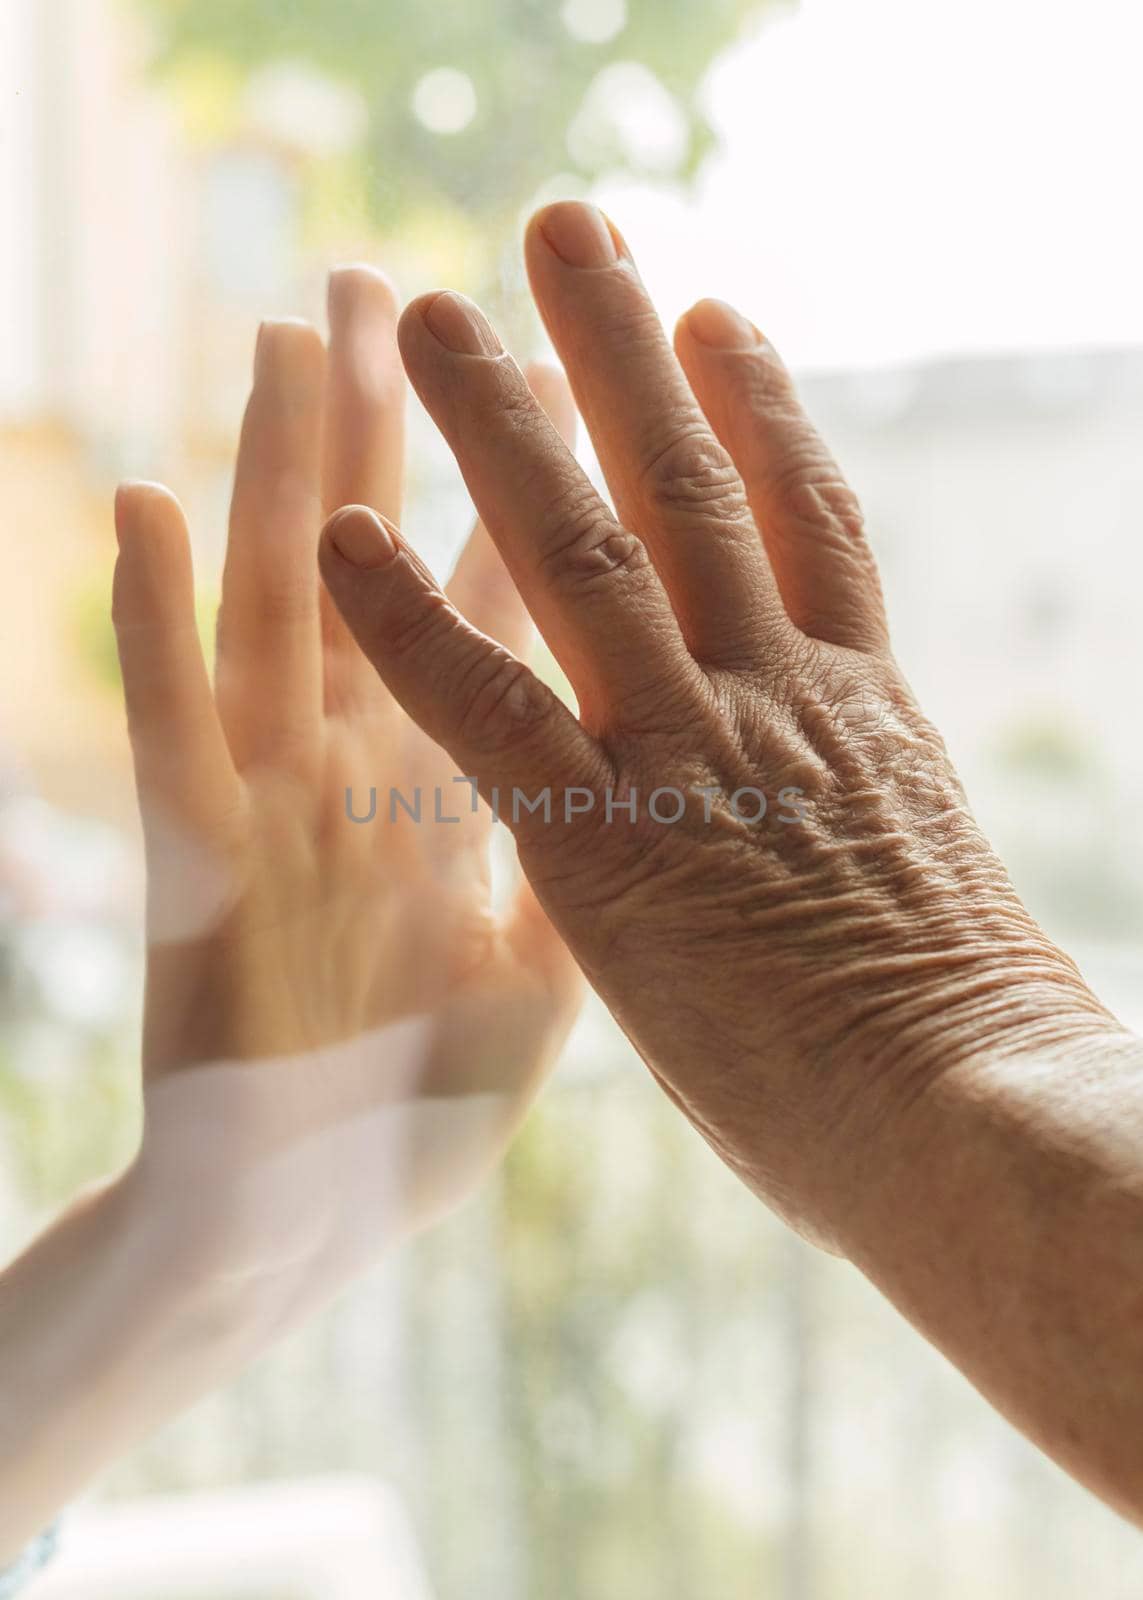 elder woman touching hand with someone through window during pandemic by Zahard